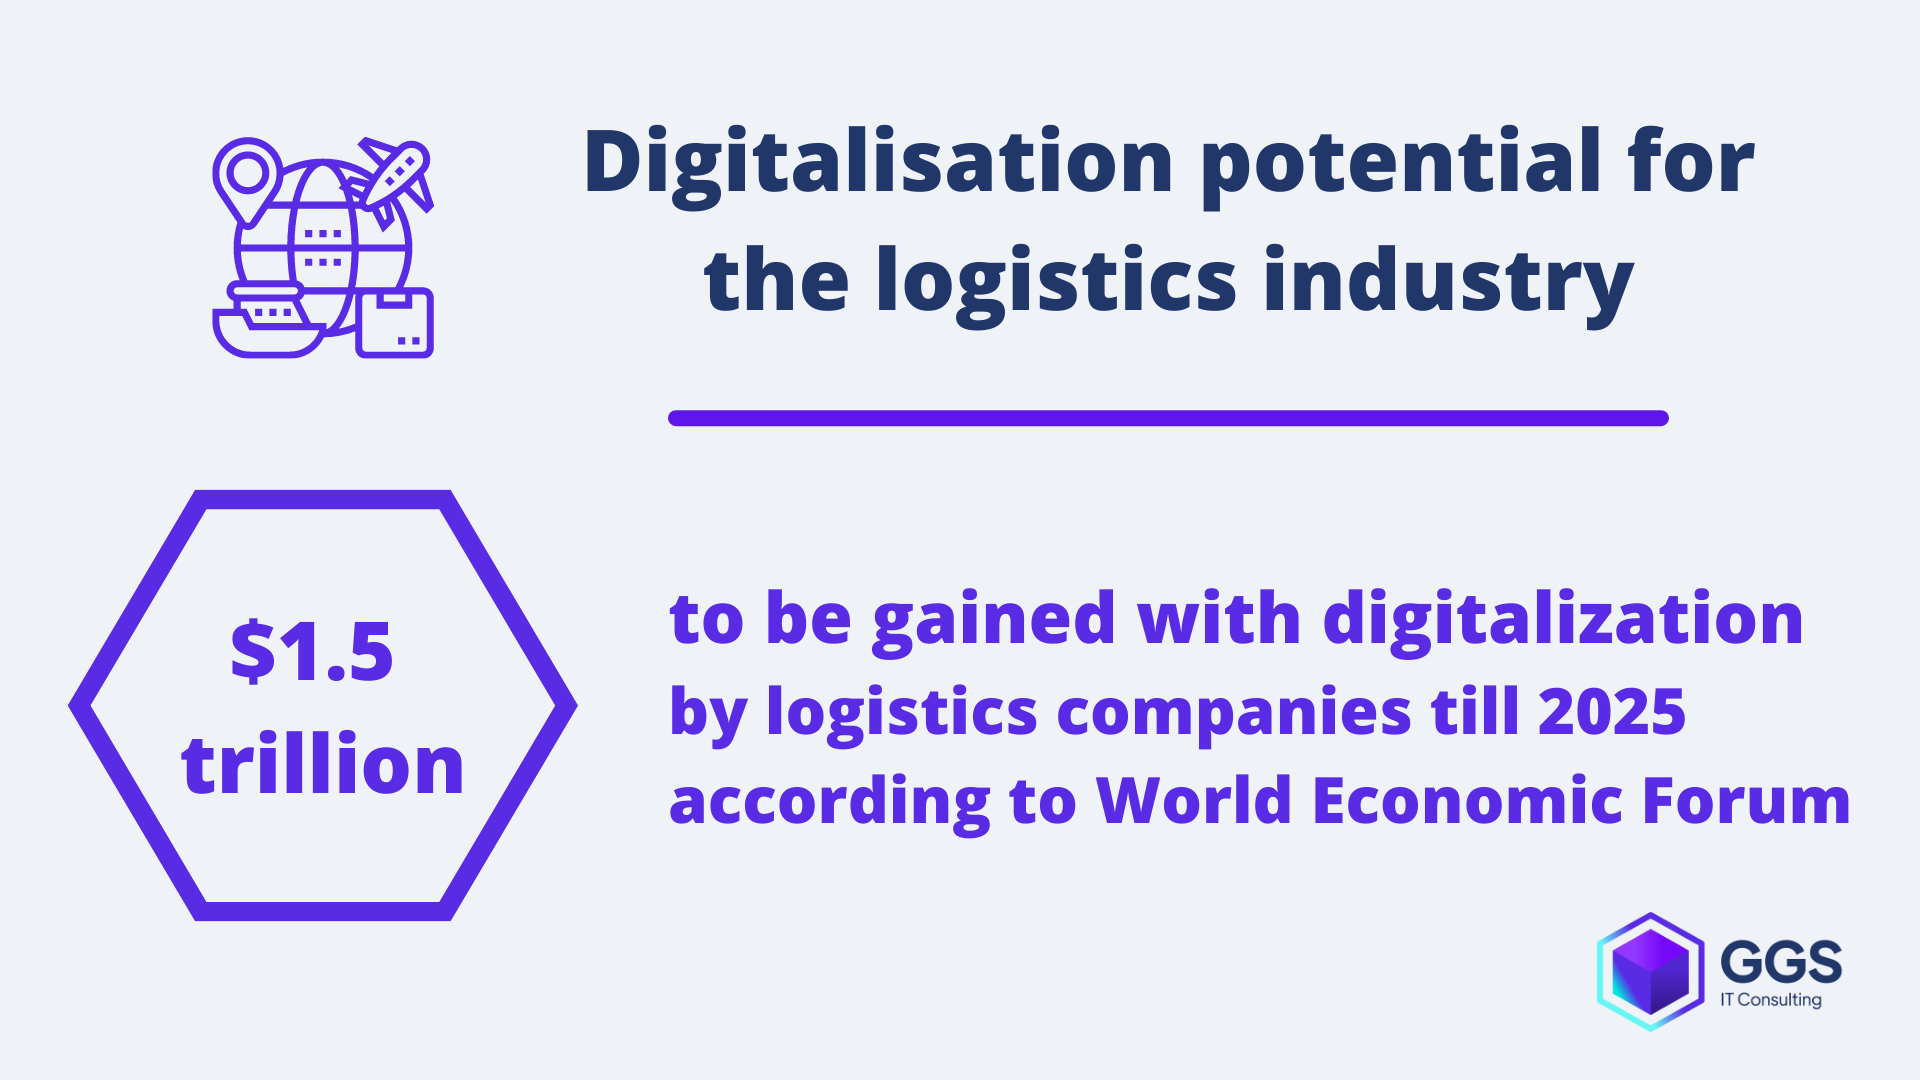 RPA potential for the logistics industry